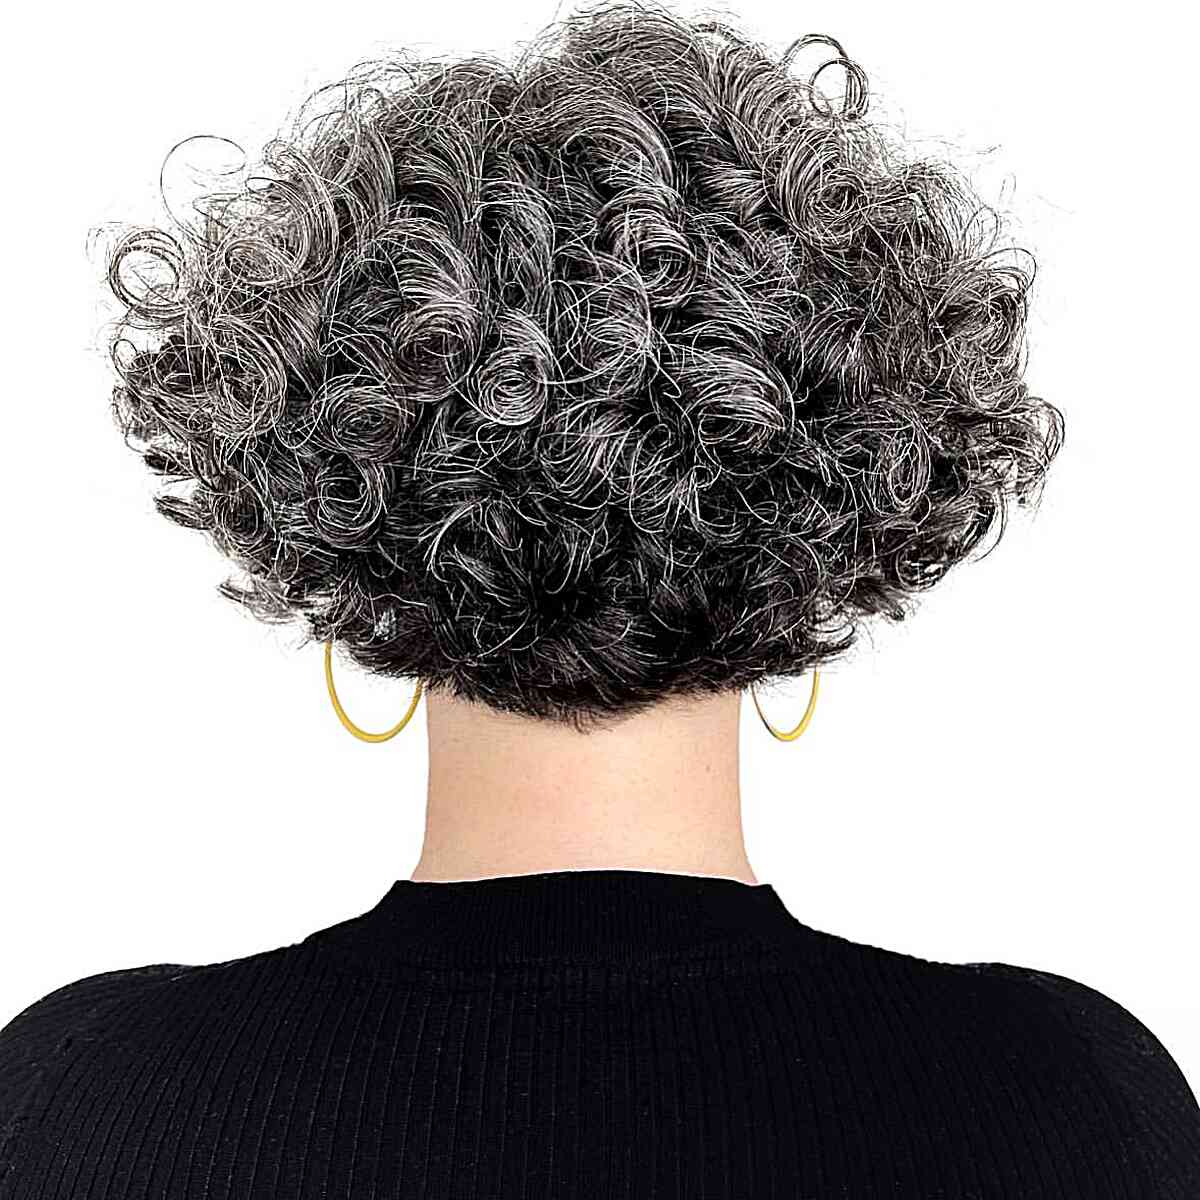 Short One-Length Curly Graduated Bob Cut for women with natural salt and pepper hair